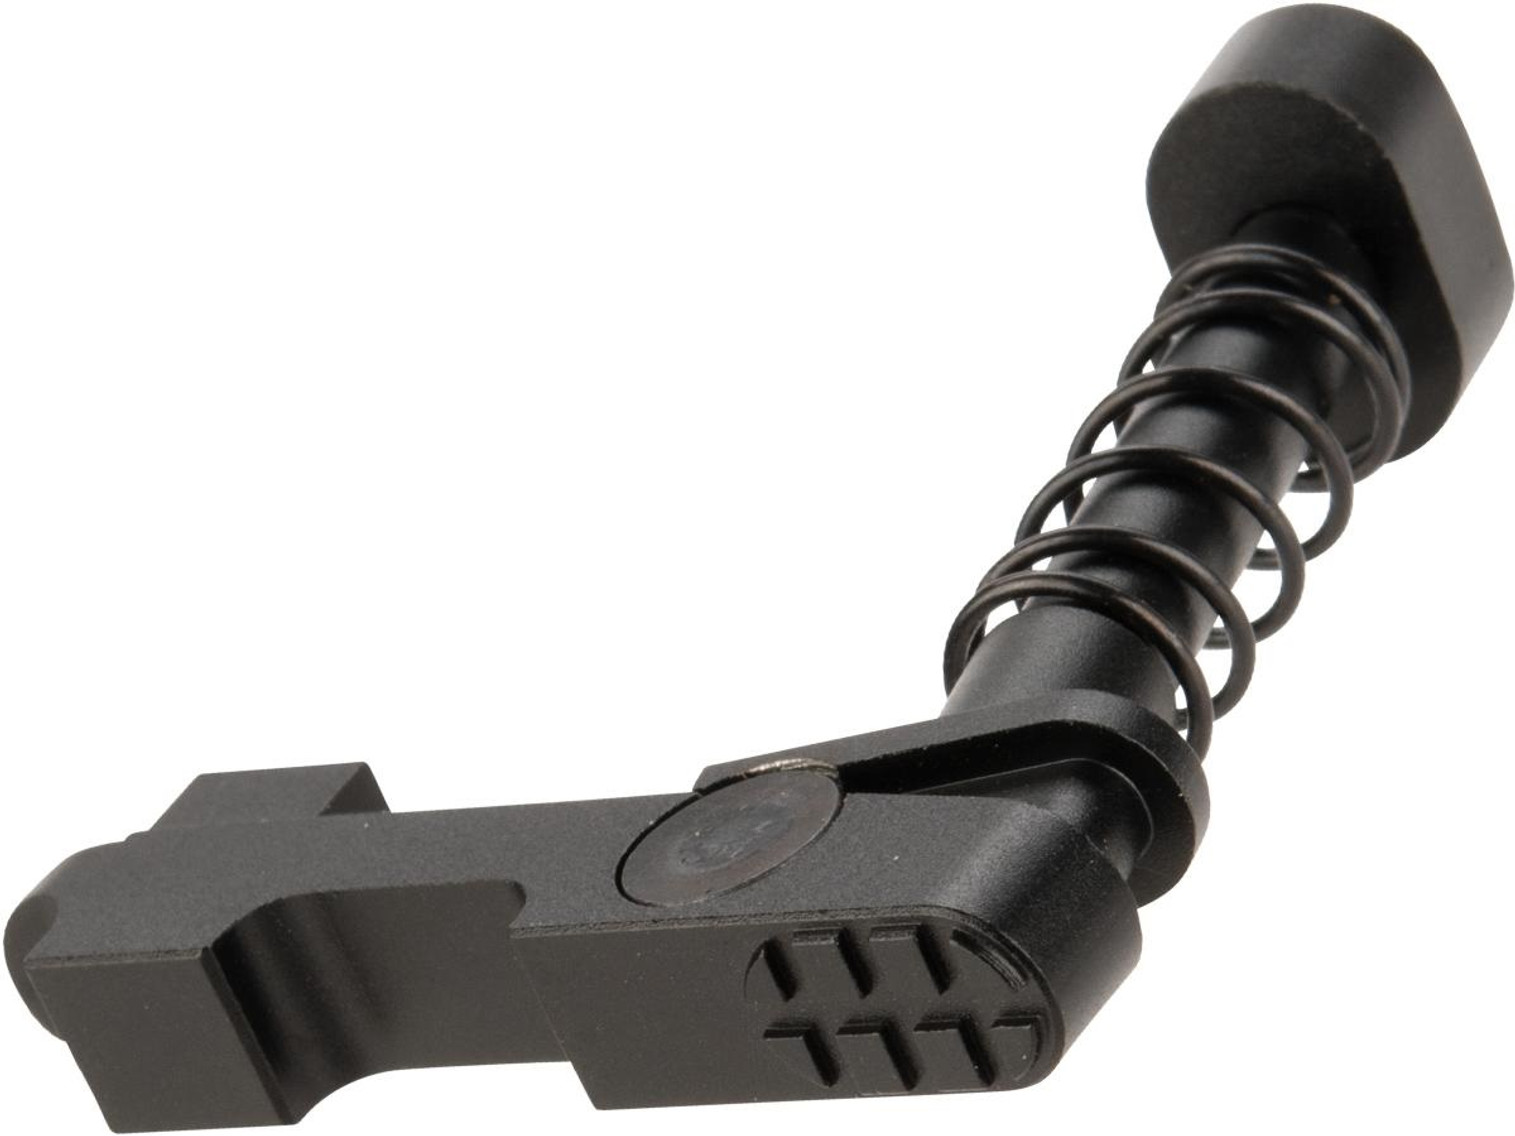 Angel Custom HEX Ambidextrous Magazine Release for M4/M16 Series Airsoft AEGs (Color: Black)